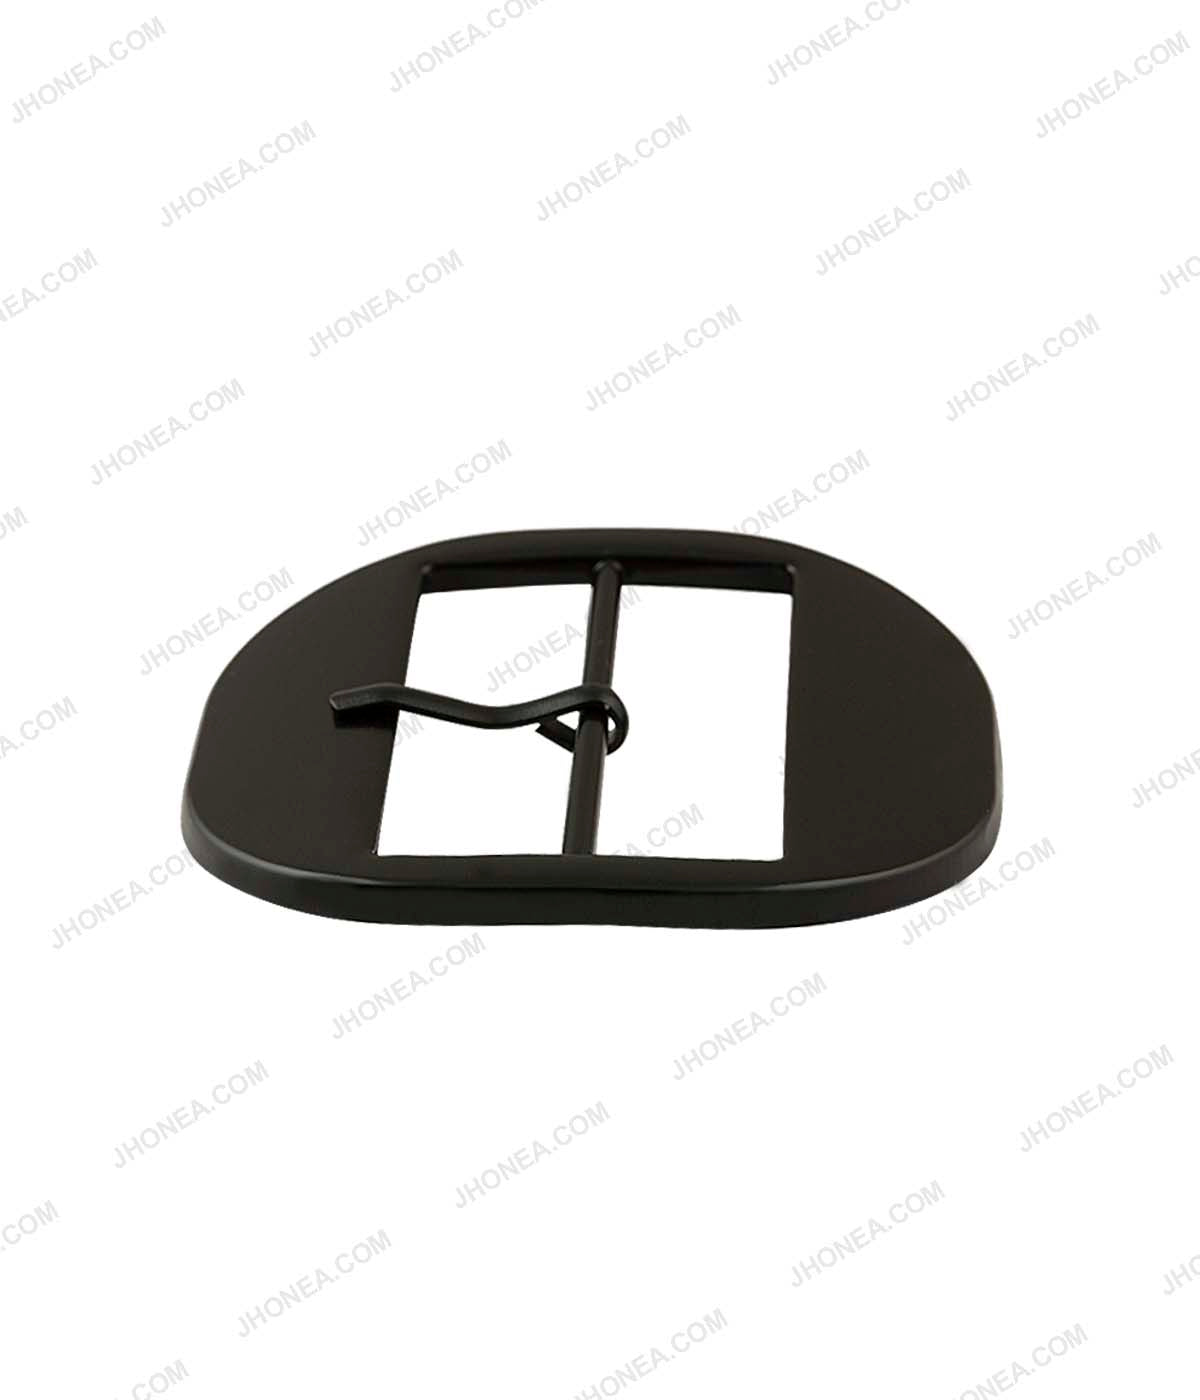 Shiny Smooth Fancy Rounded Square Frame Belt Buckle with Prong